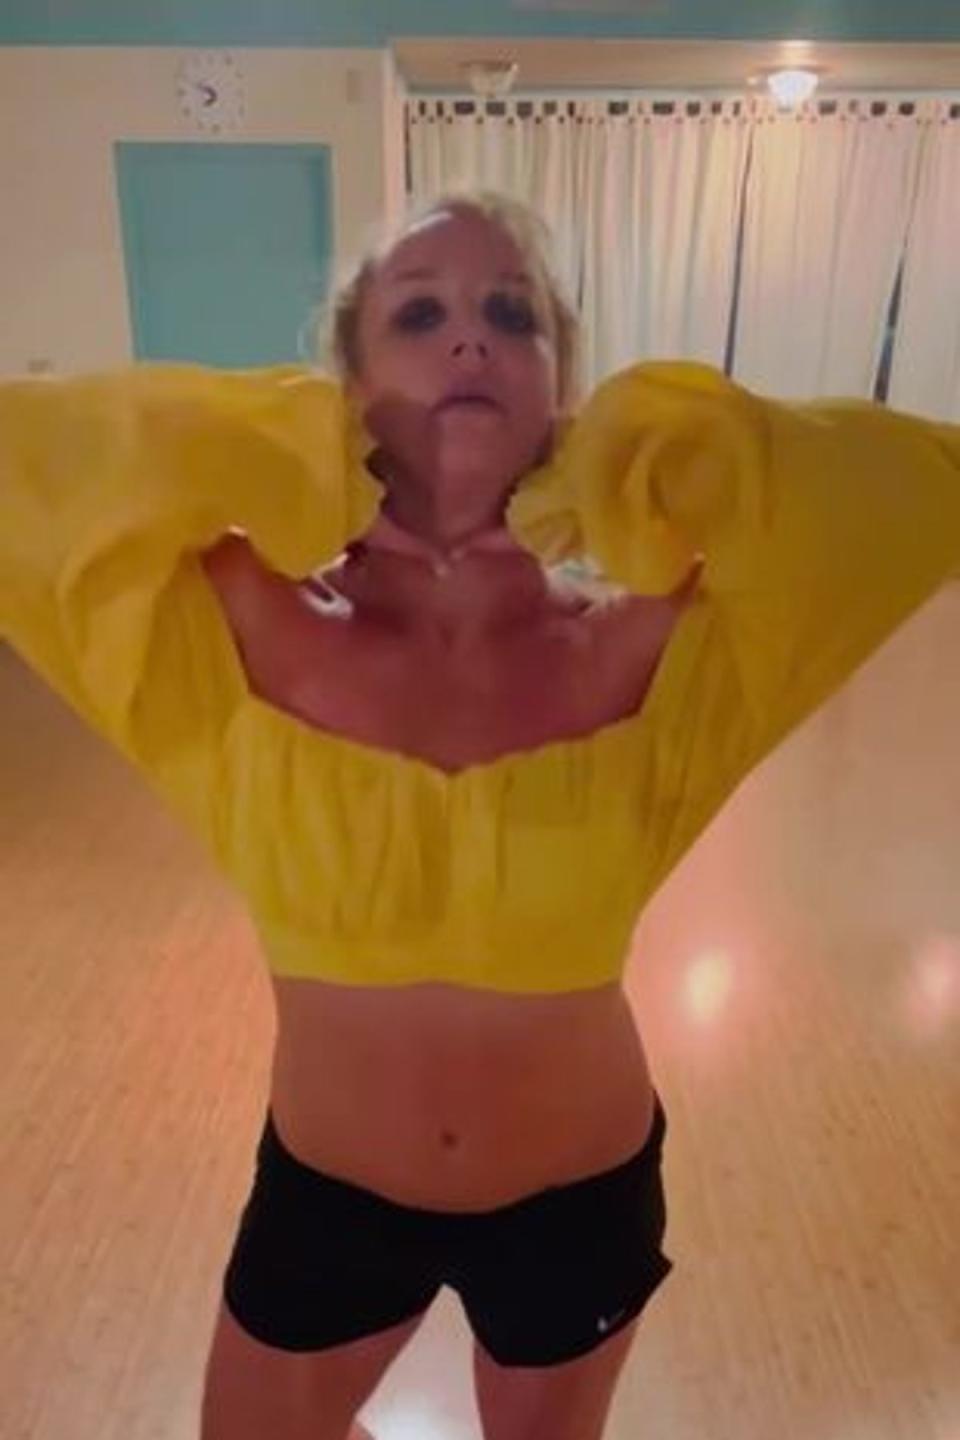 Britney Spears has sparked concern among fans with her new dancing video which shows her ‘choking’ herself (Instagram/BritneySpears)